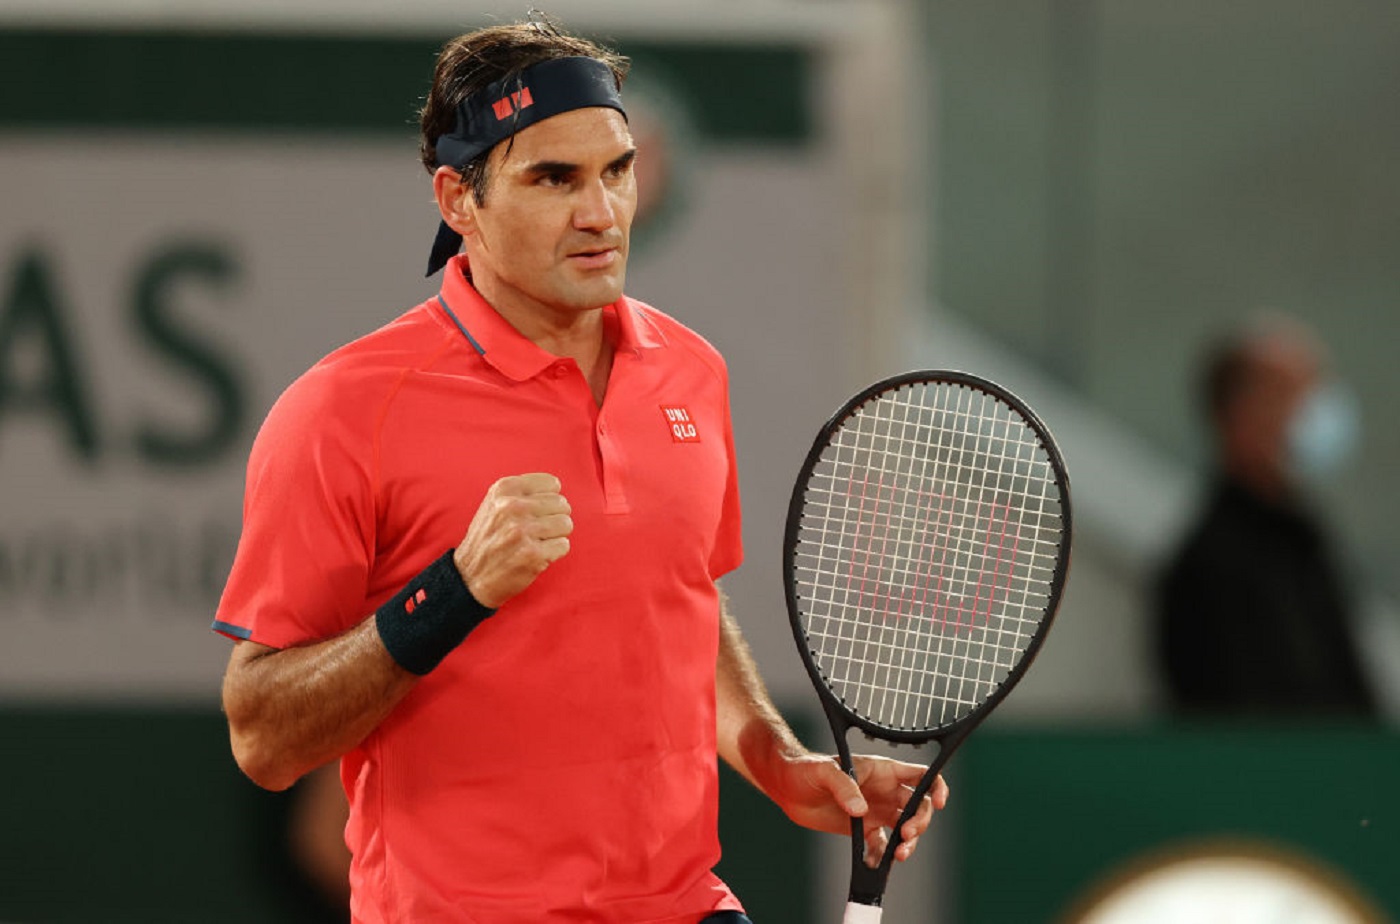 Roland Garros: A new Roger Federer experience. This is a ...